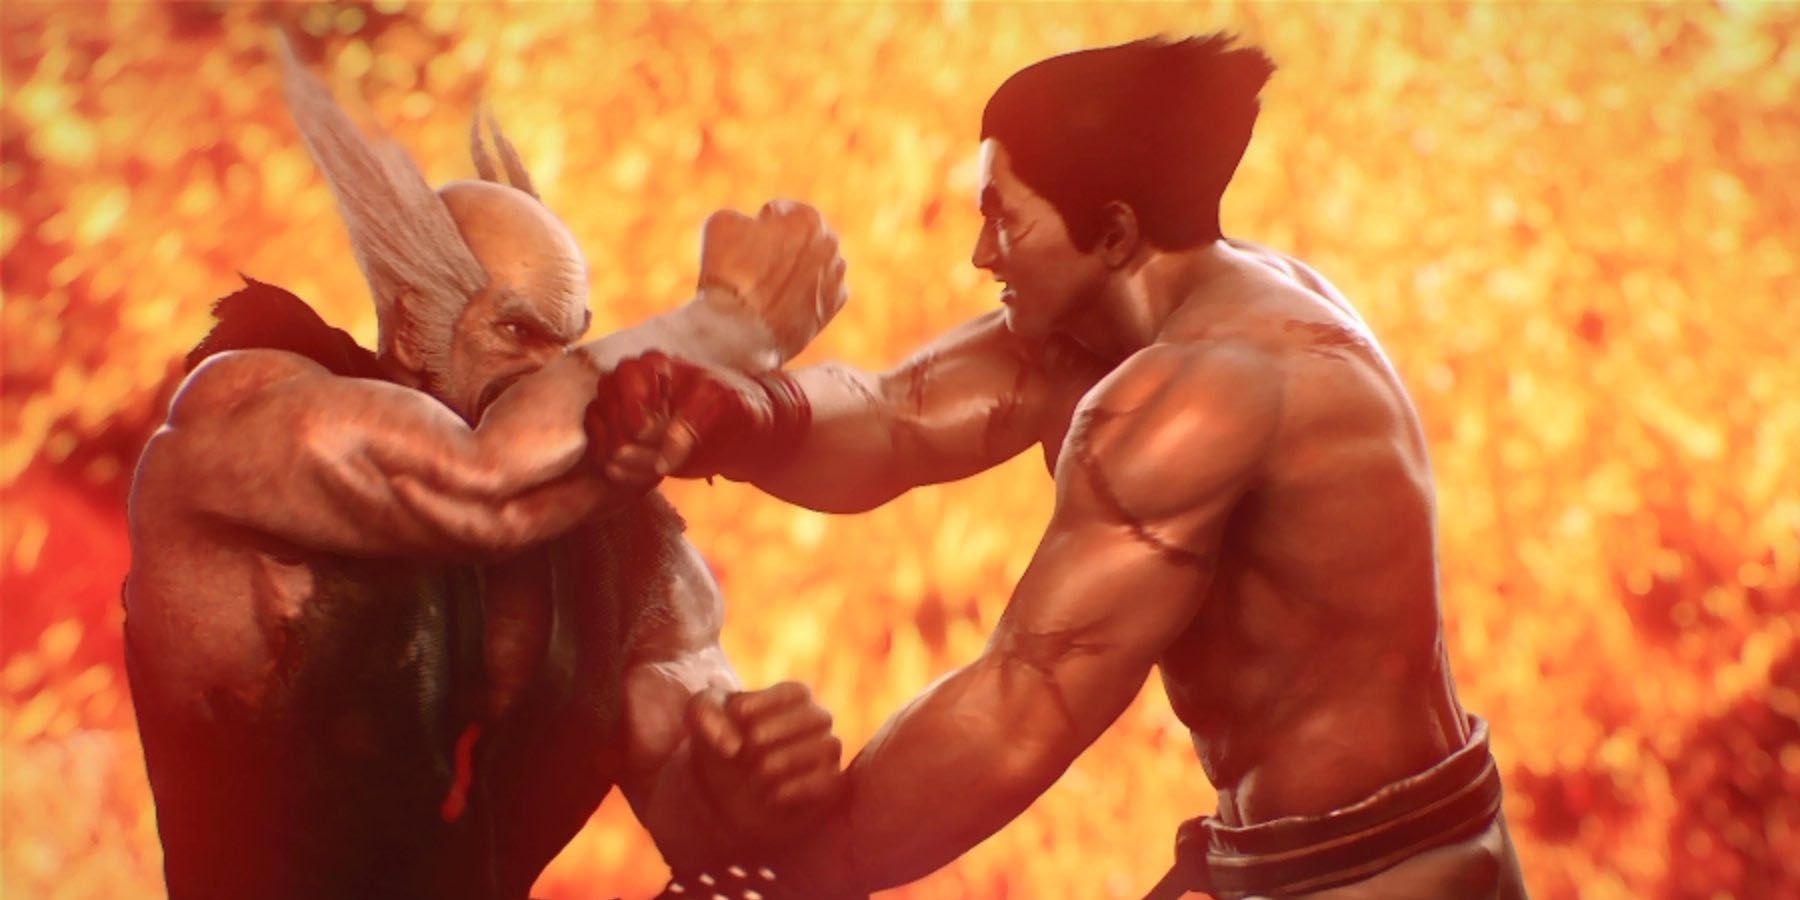 will there be a complete edition of tekken 7?